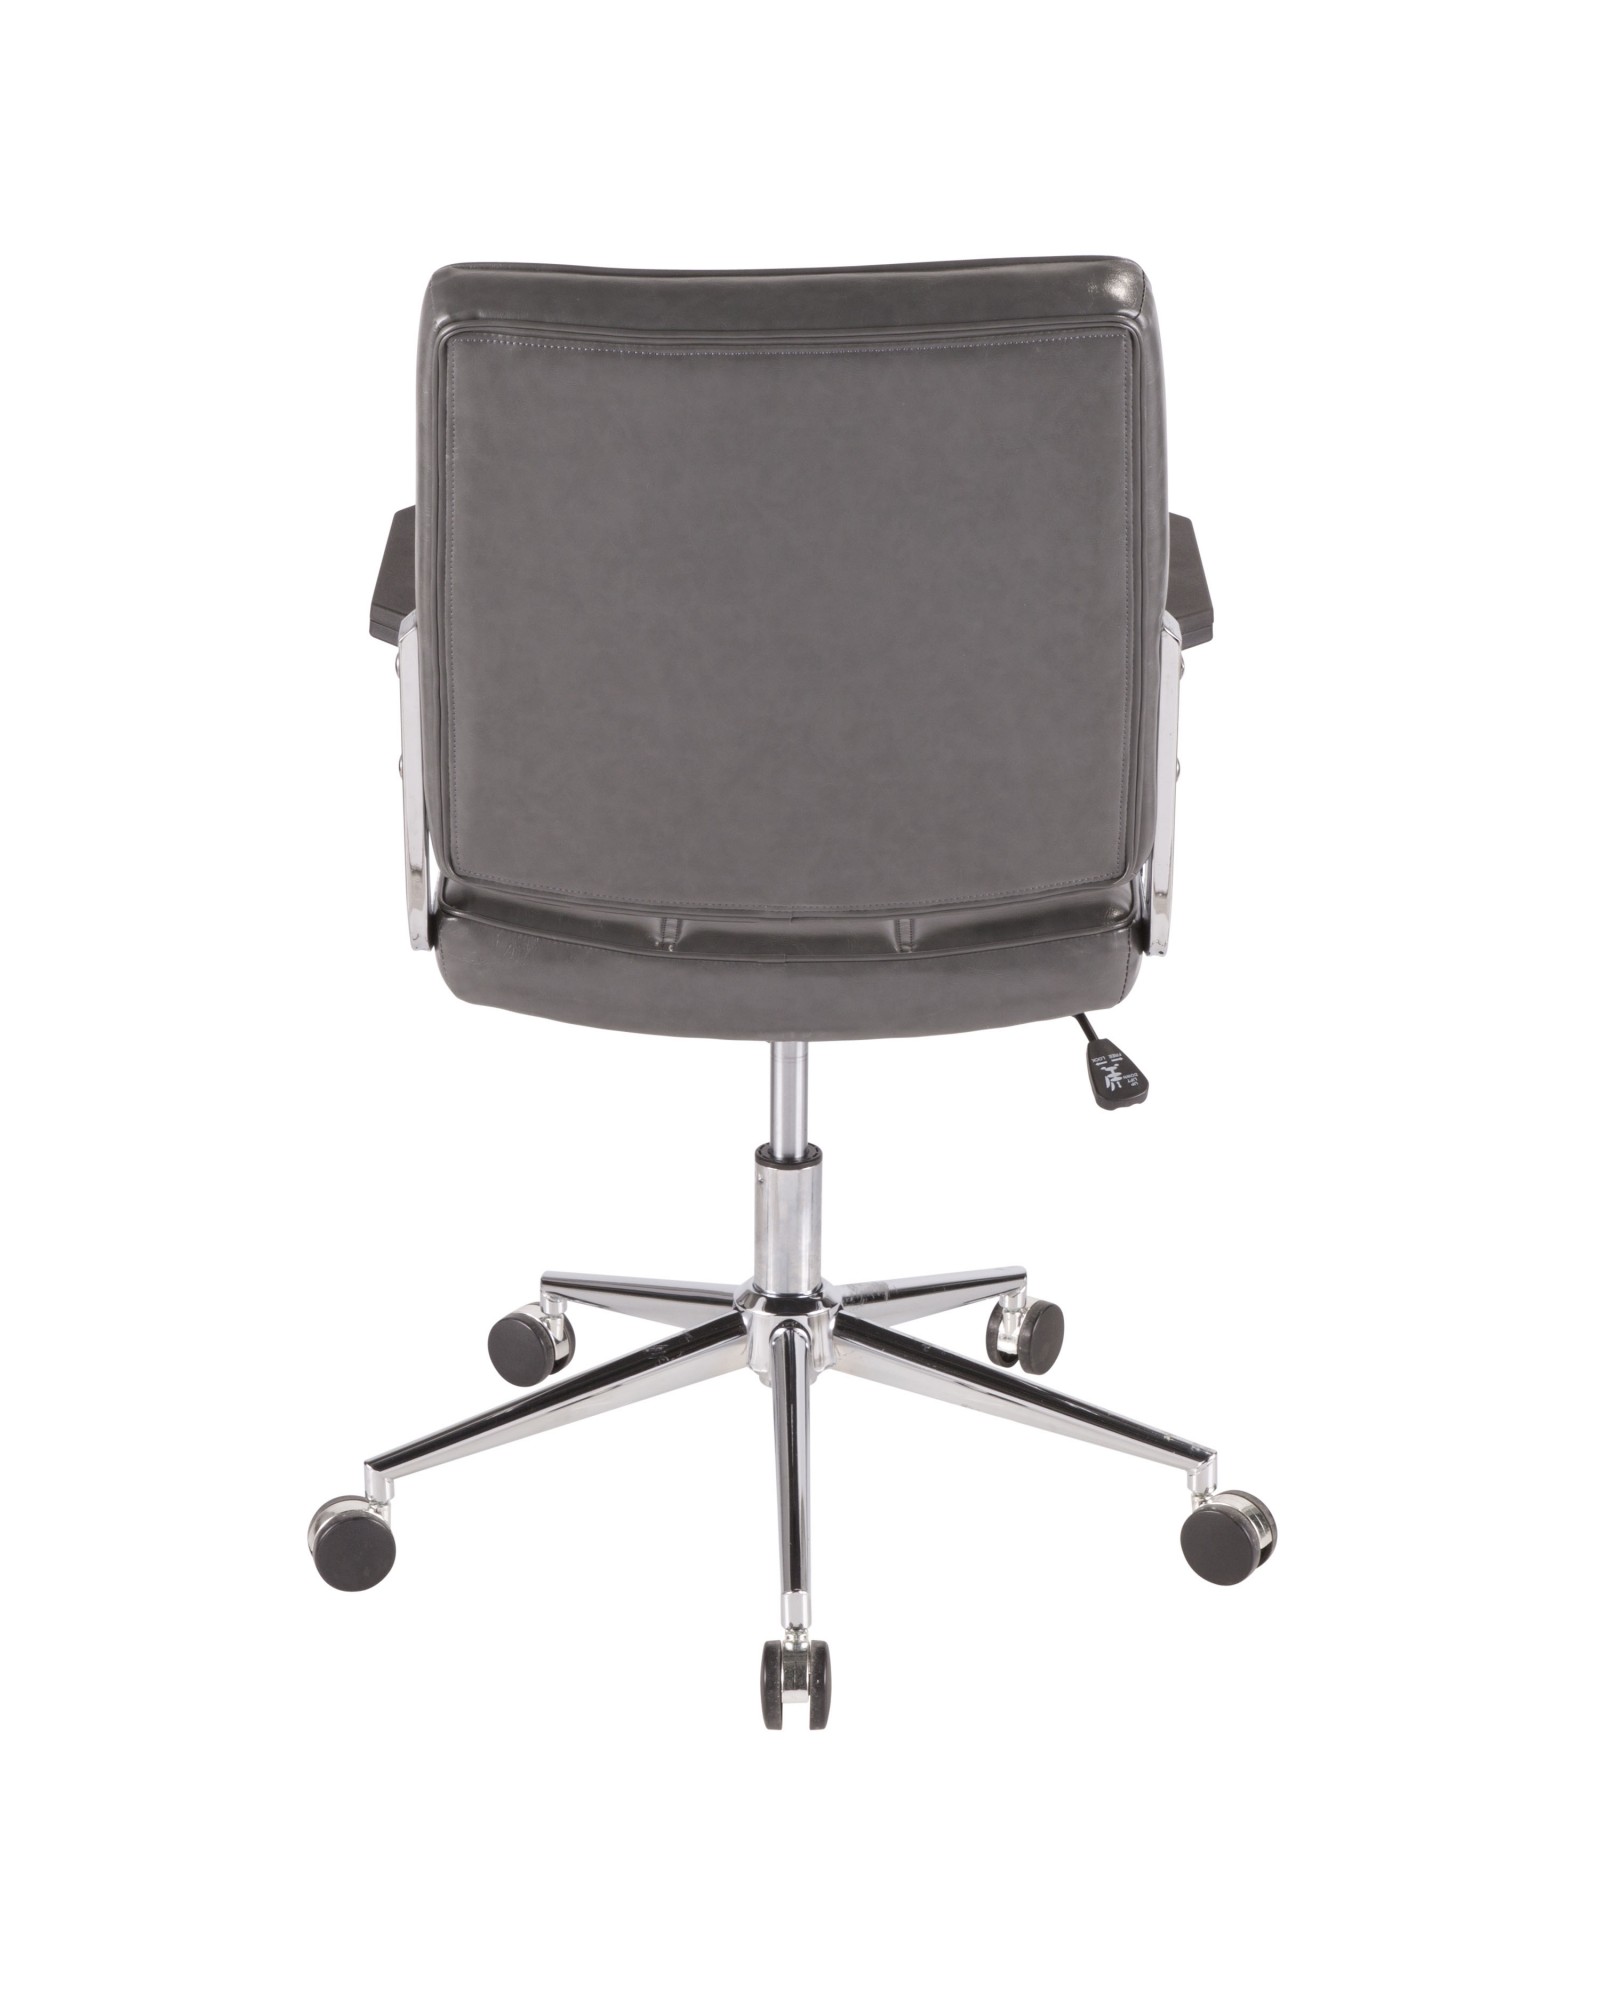 Bureau Contemporary Office Chair with Chrome Metal and Grey Faux Leather